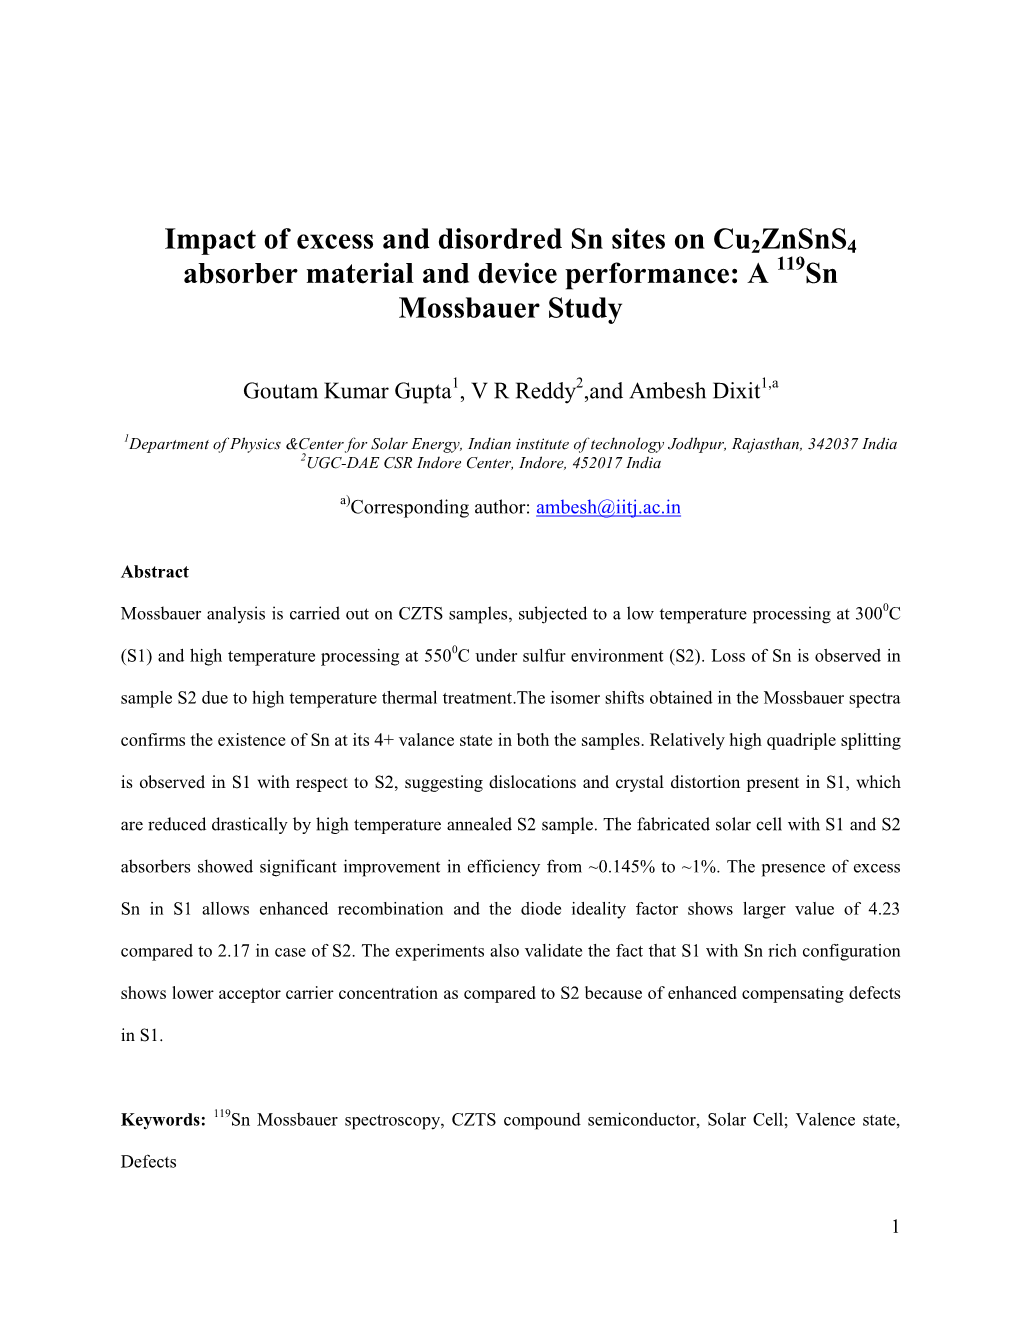 Impact of Excess and Disordred Sn Sites on Cu2znsns4 Absorber Material and Device Performance: a 119Sn Mossbauer Study